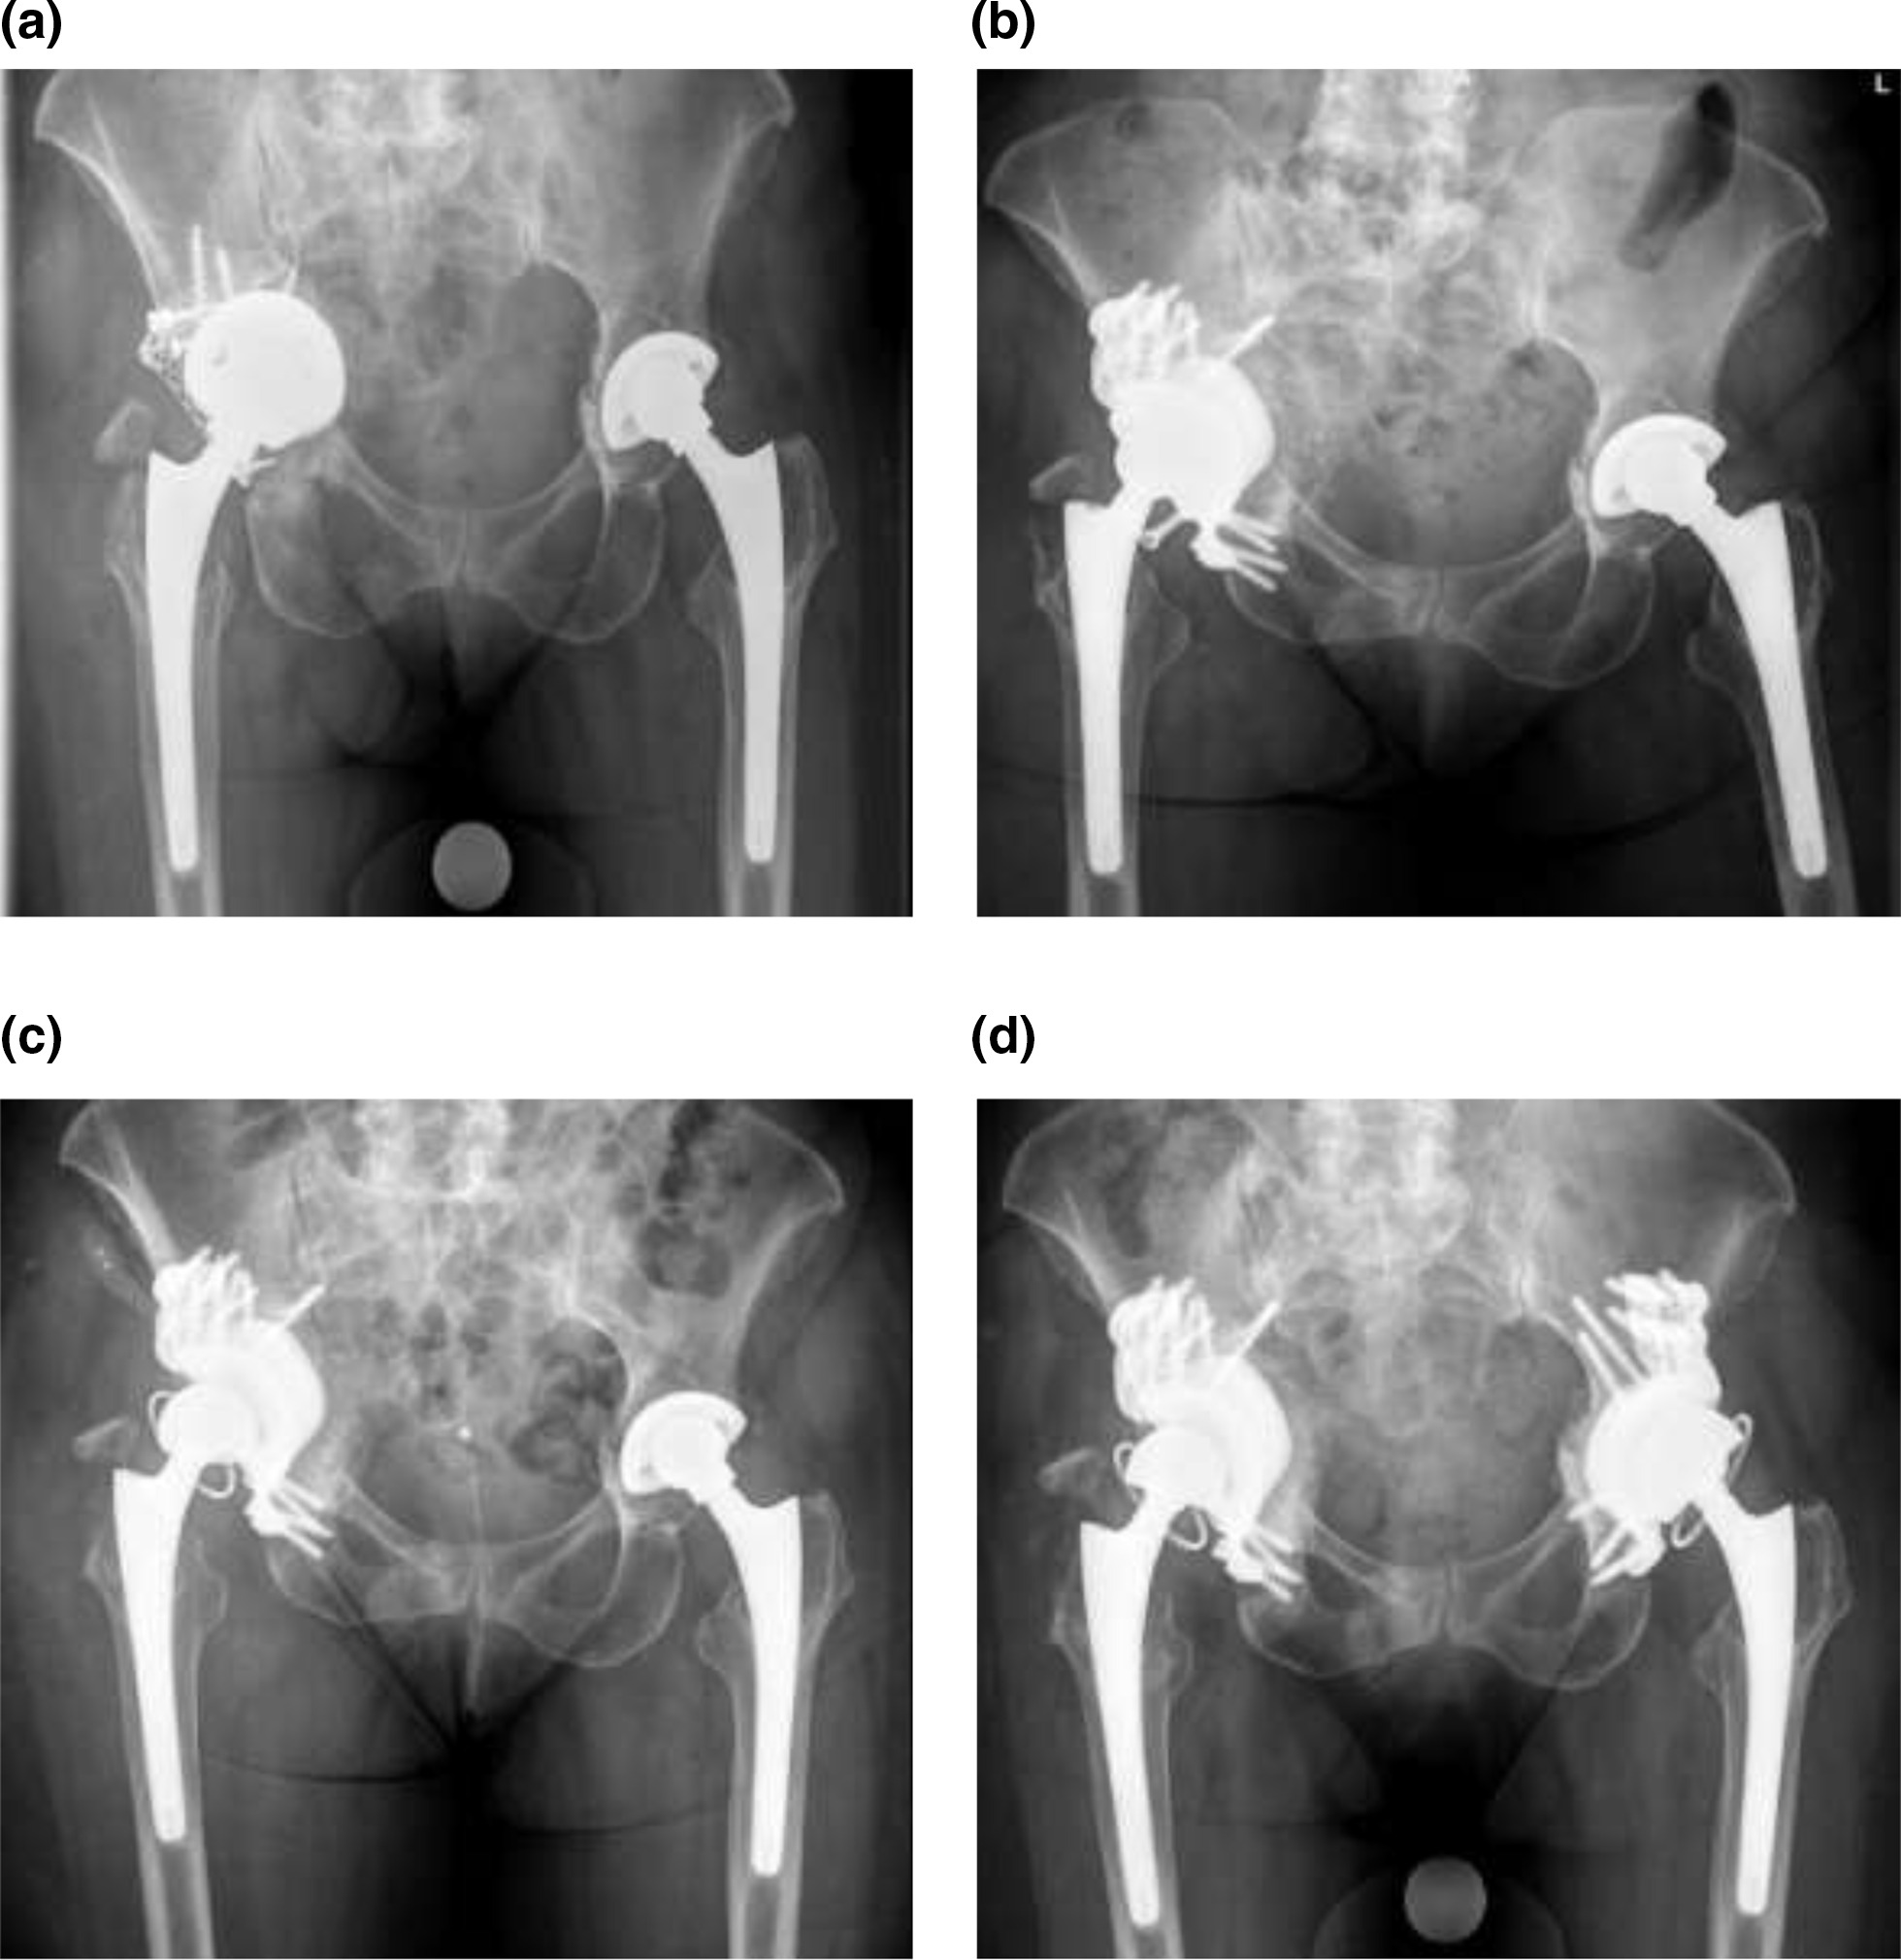 Fig. 1 
            Case example (case B) of a patient with concurrent (i.e. synchronous) bilateral pelvic discontinuity. A complete discontinuity is shown between the superior and inferior pelvis. b) Non-immediate postoperative anteroposterior pelvic radiograph with a custom-made triflange component of the right hip. Note the concurrent pelvic discontinuity on the left side. c) Revision of the custom-made triflange component on the right hip due to recurrent dislocations six weeks postoperatively, which was managed by open reduction and conversion from a dual-mobility cup to a constrained liner. d) After 11 months: revision of the left hip to a custom-made triflange component with a constrained liner.
          